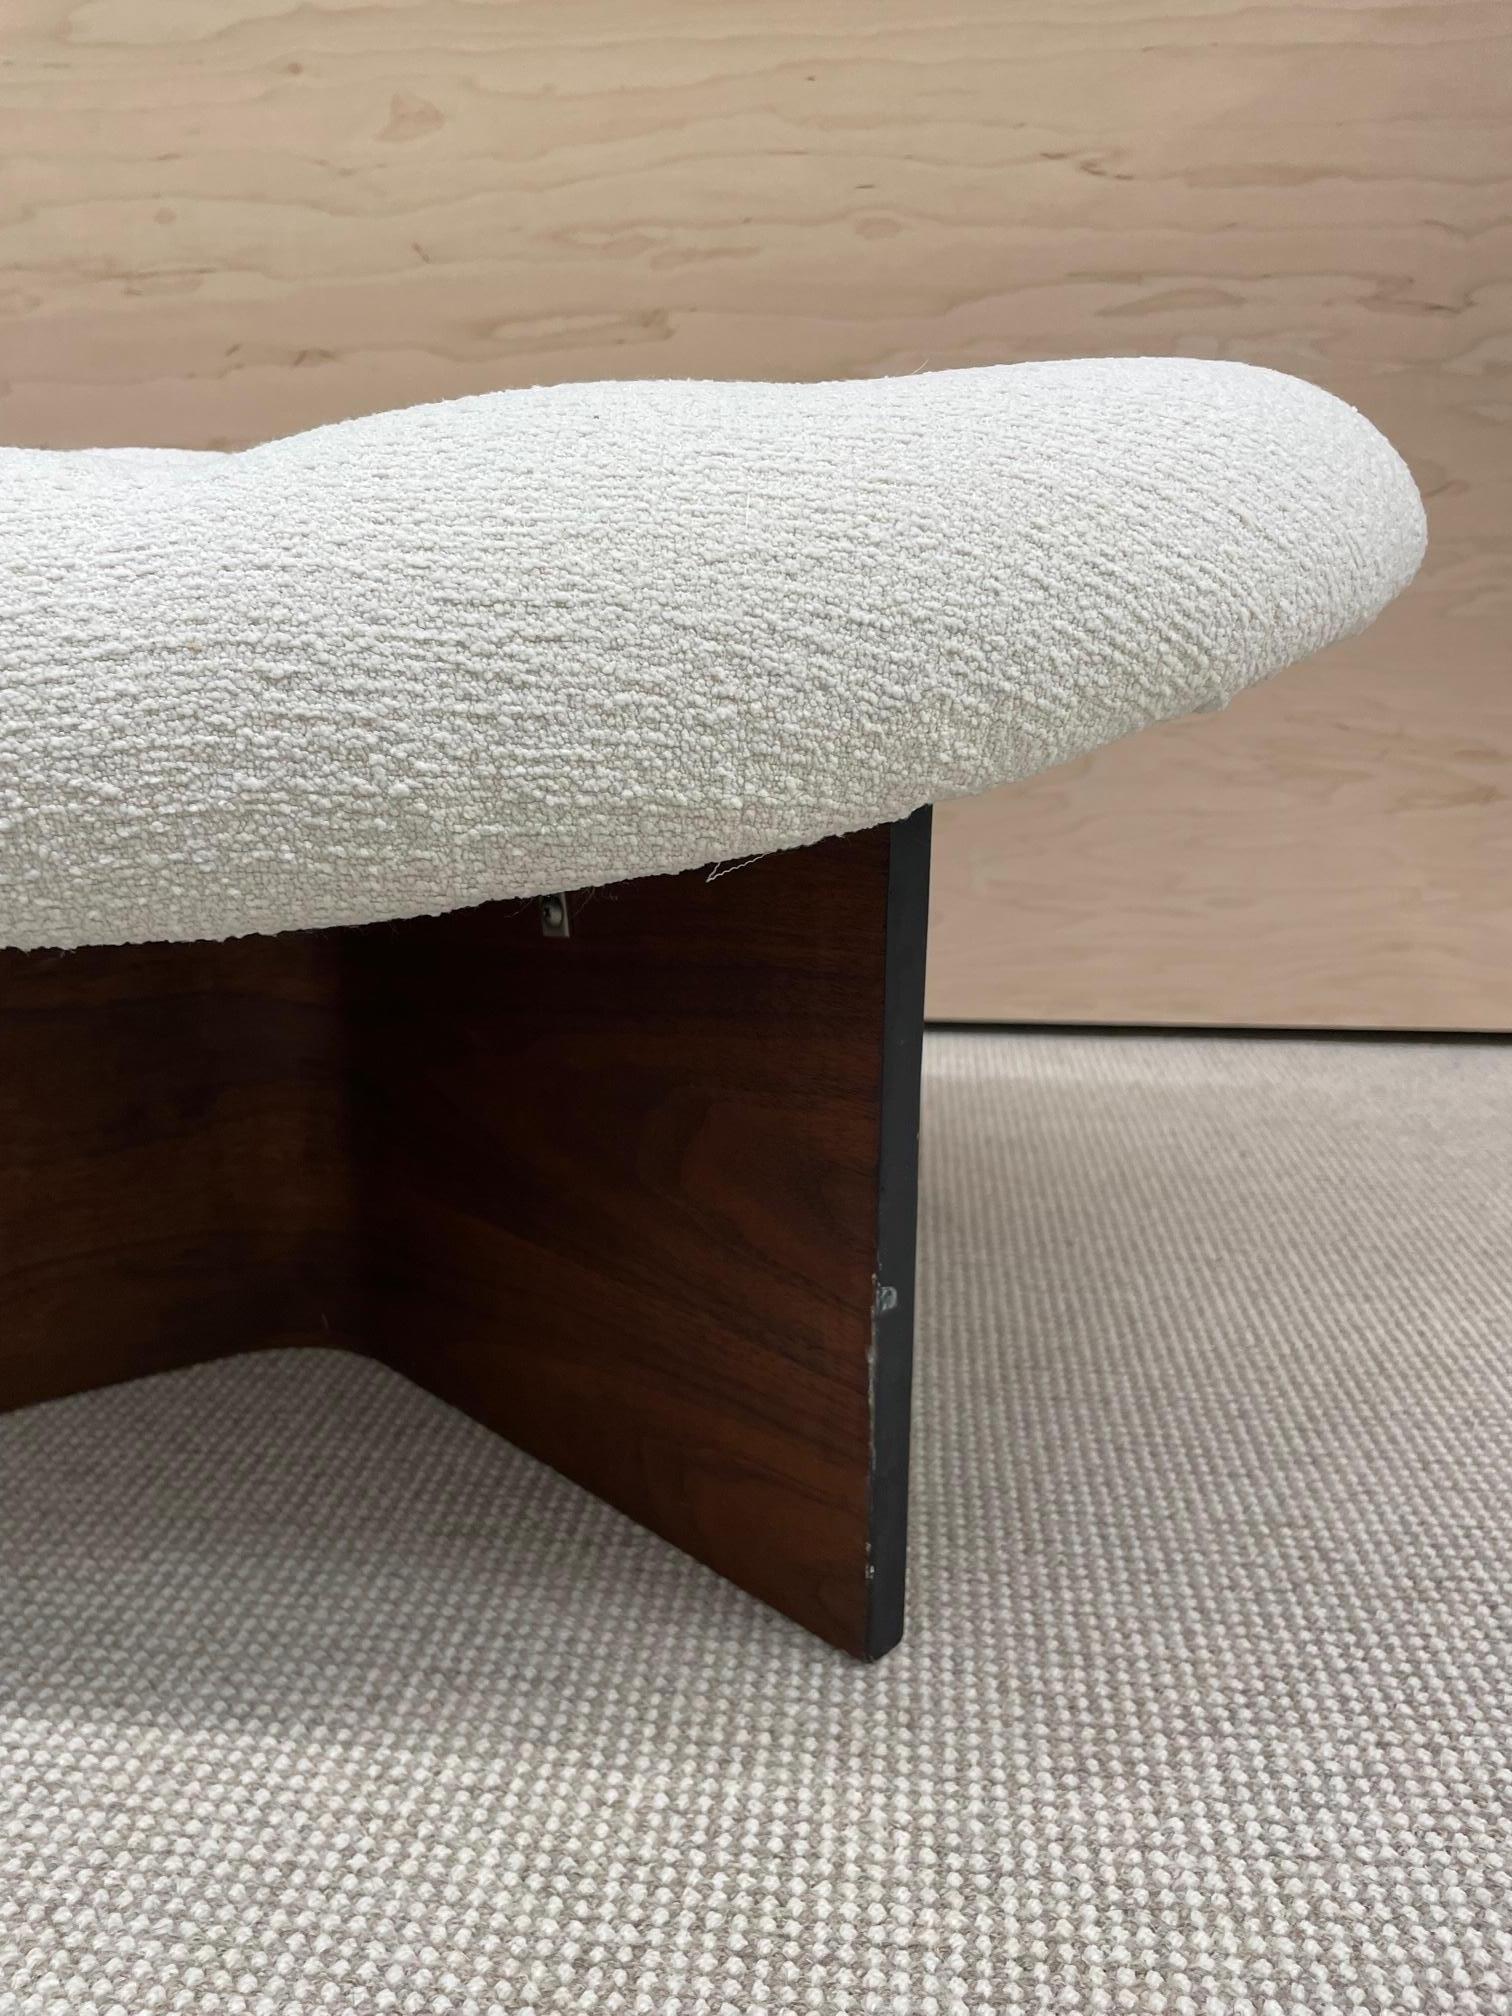 Bouclé Mid-Century Modern, Footstool, White Boucle, Walnut, United States, 1960s For Sale